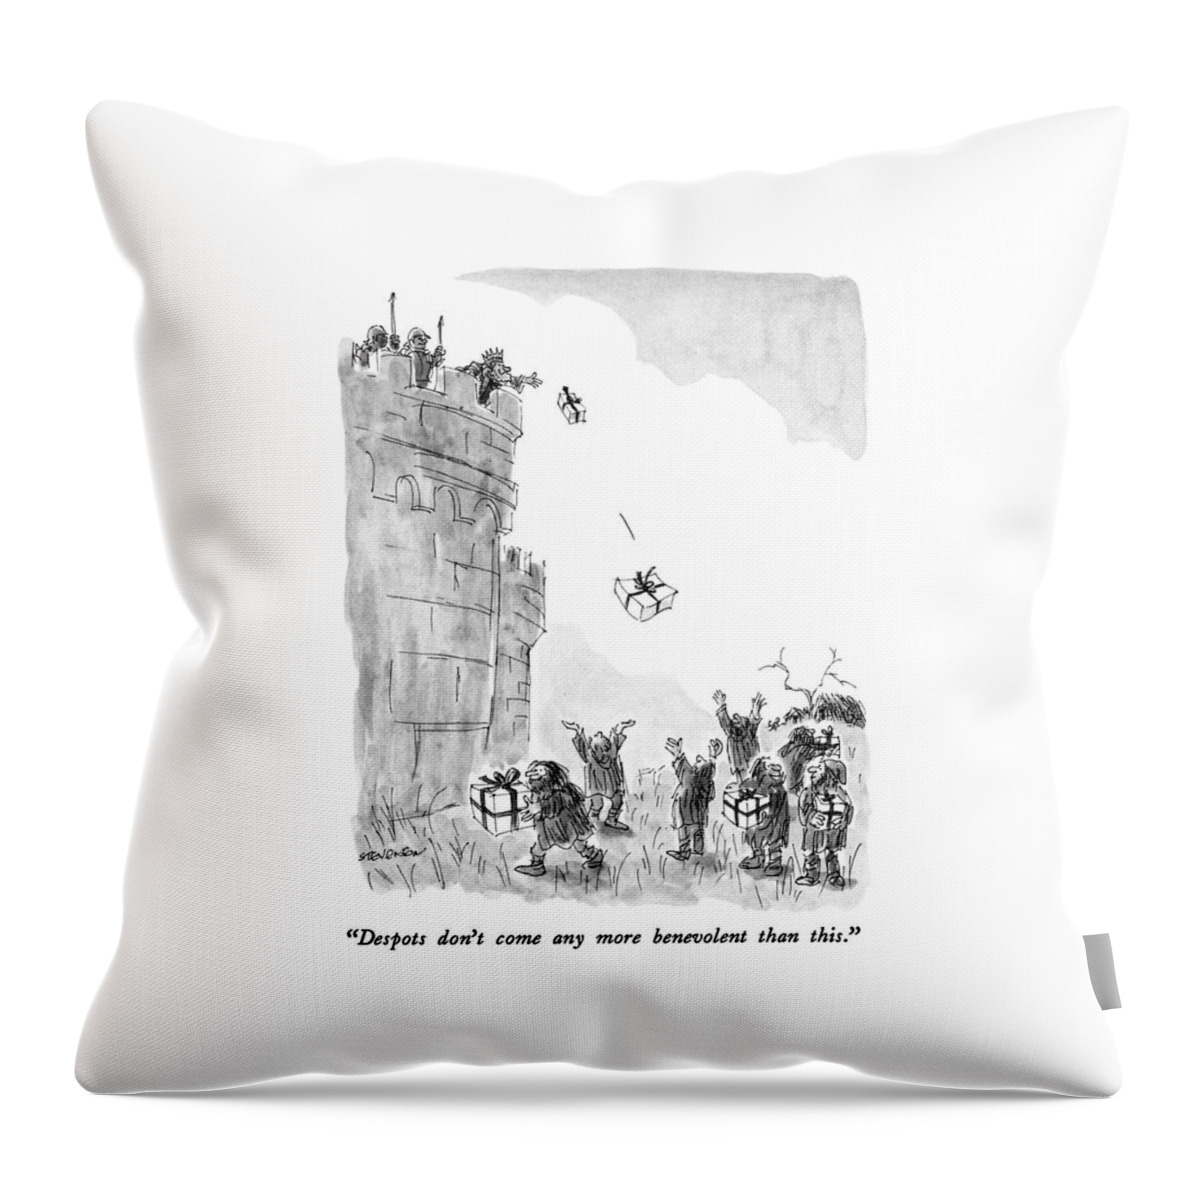 Despots Don't Come Any More Benevolent Than This Throw Pillow